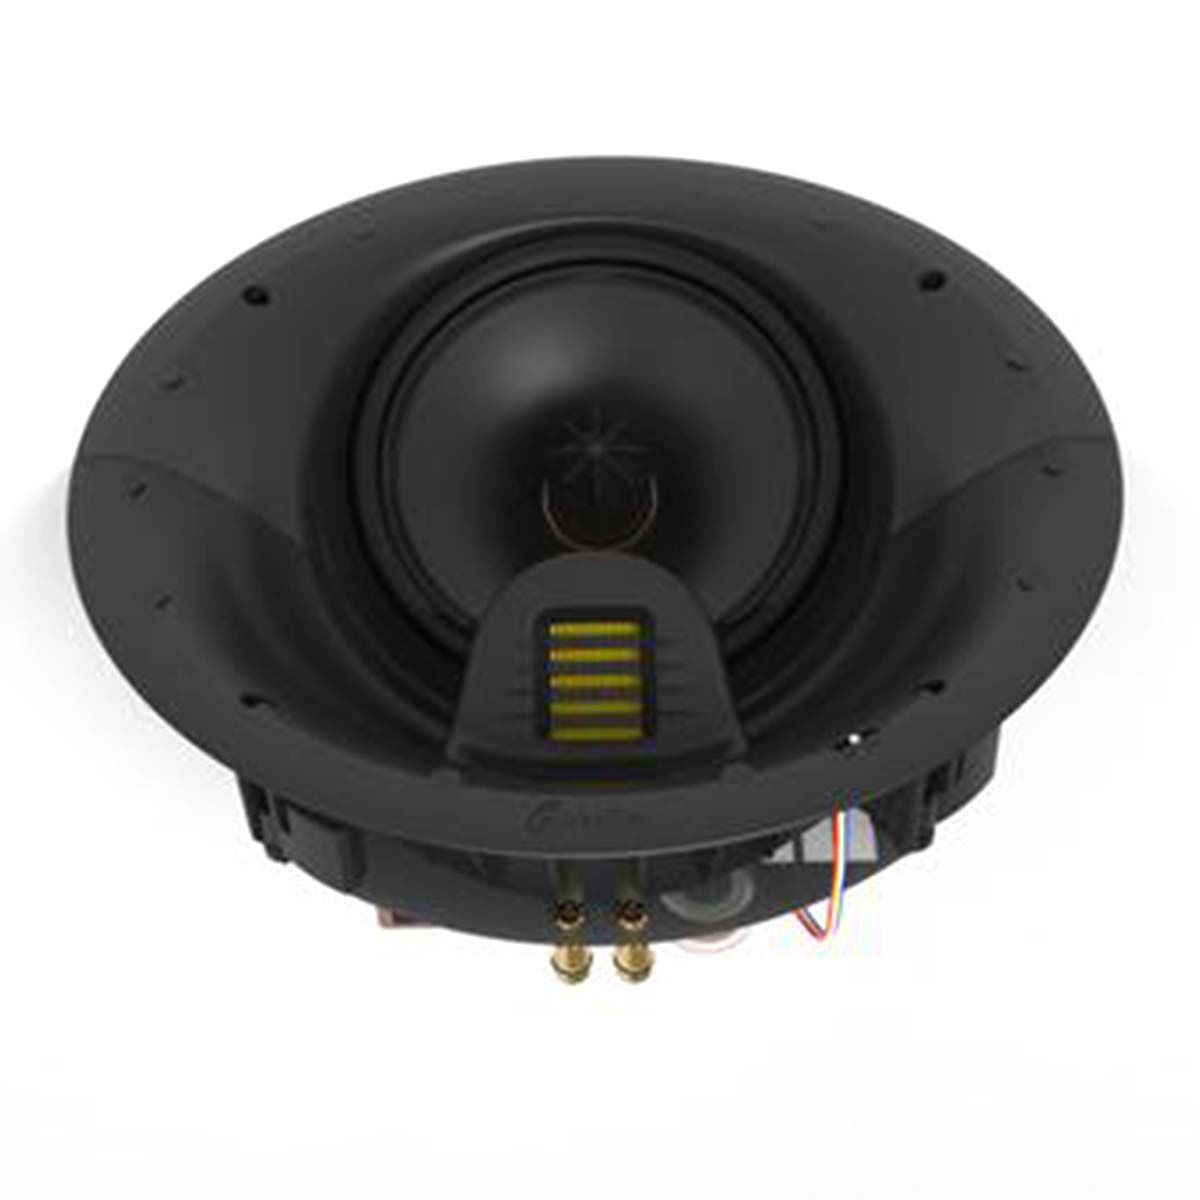 GoldenEar Invisa HTR 8000 In-Ceiling LCR Speaker, front view with grille off